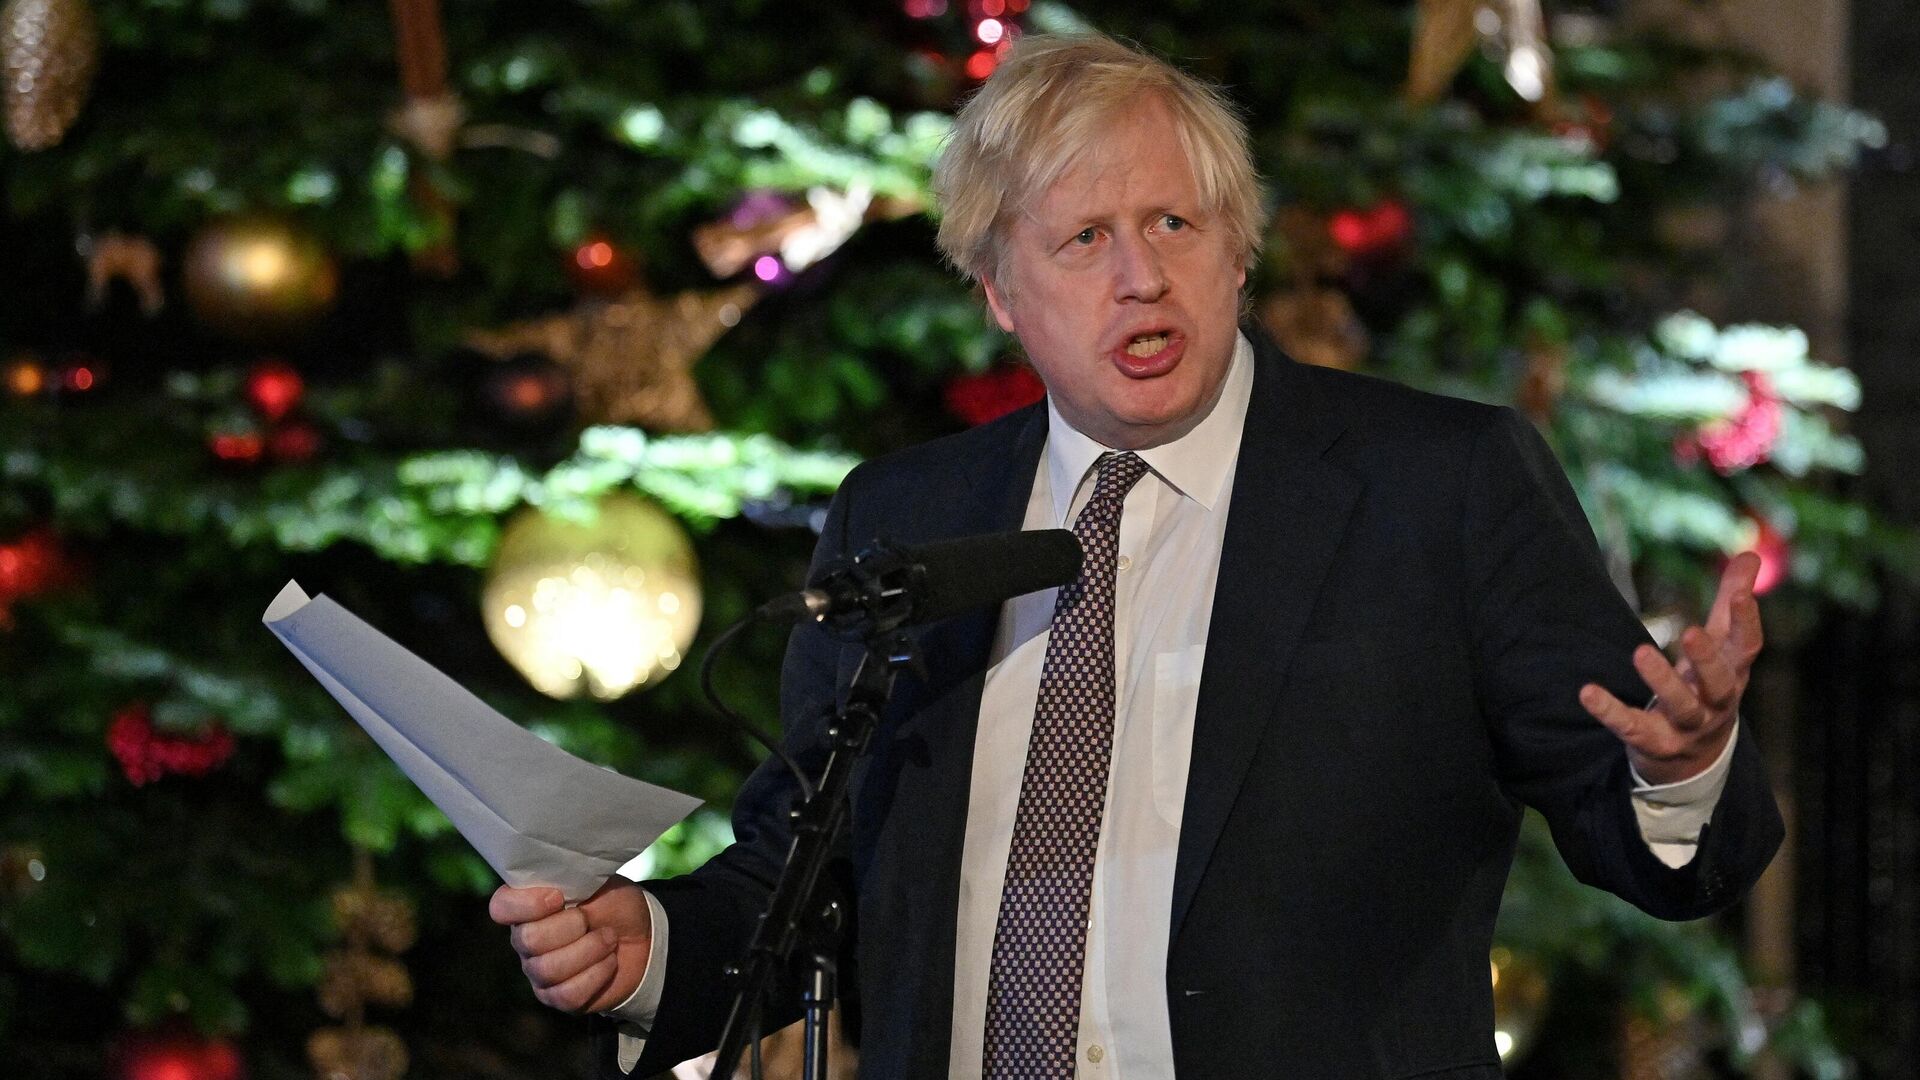 Britain's Prime Minister Boris Johnson makes a speech as he visits a UK Food and Drinks market set up in Downing Street, central London on November 30, 2021. (Photo by JUSTIN TALLIS / POOL / AFP) - Sputnik International, 1920, 06.12.2021